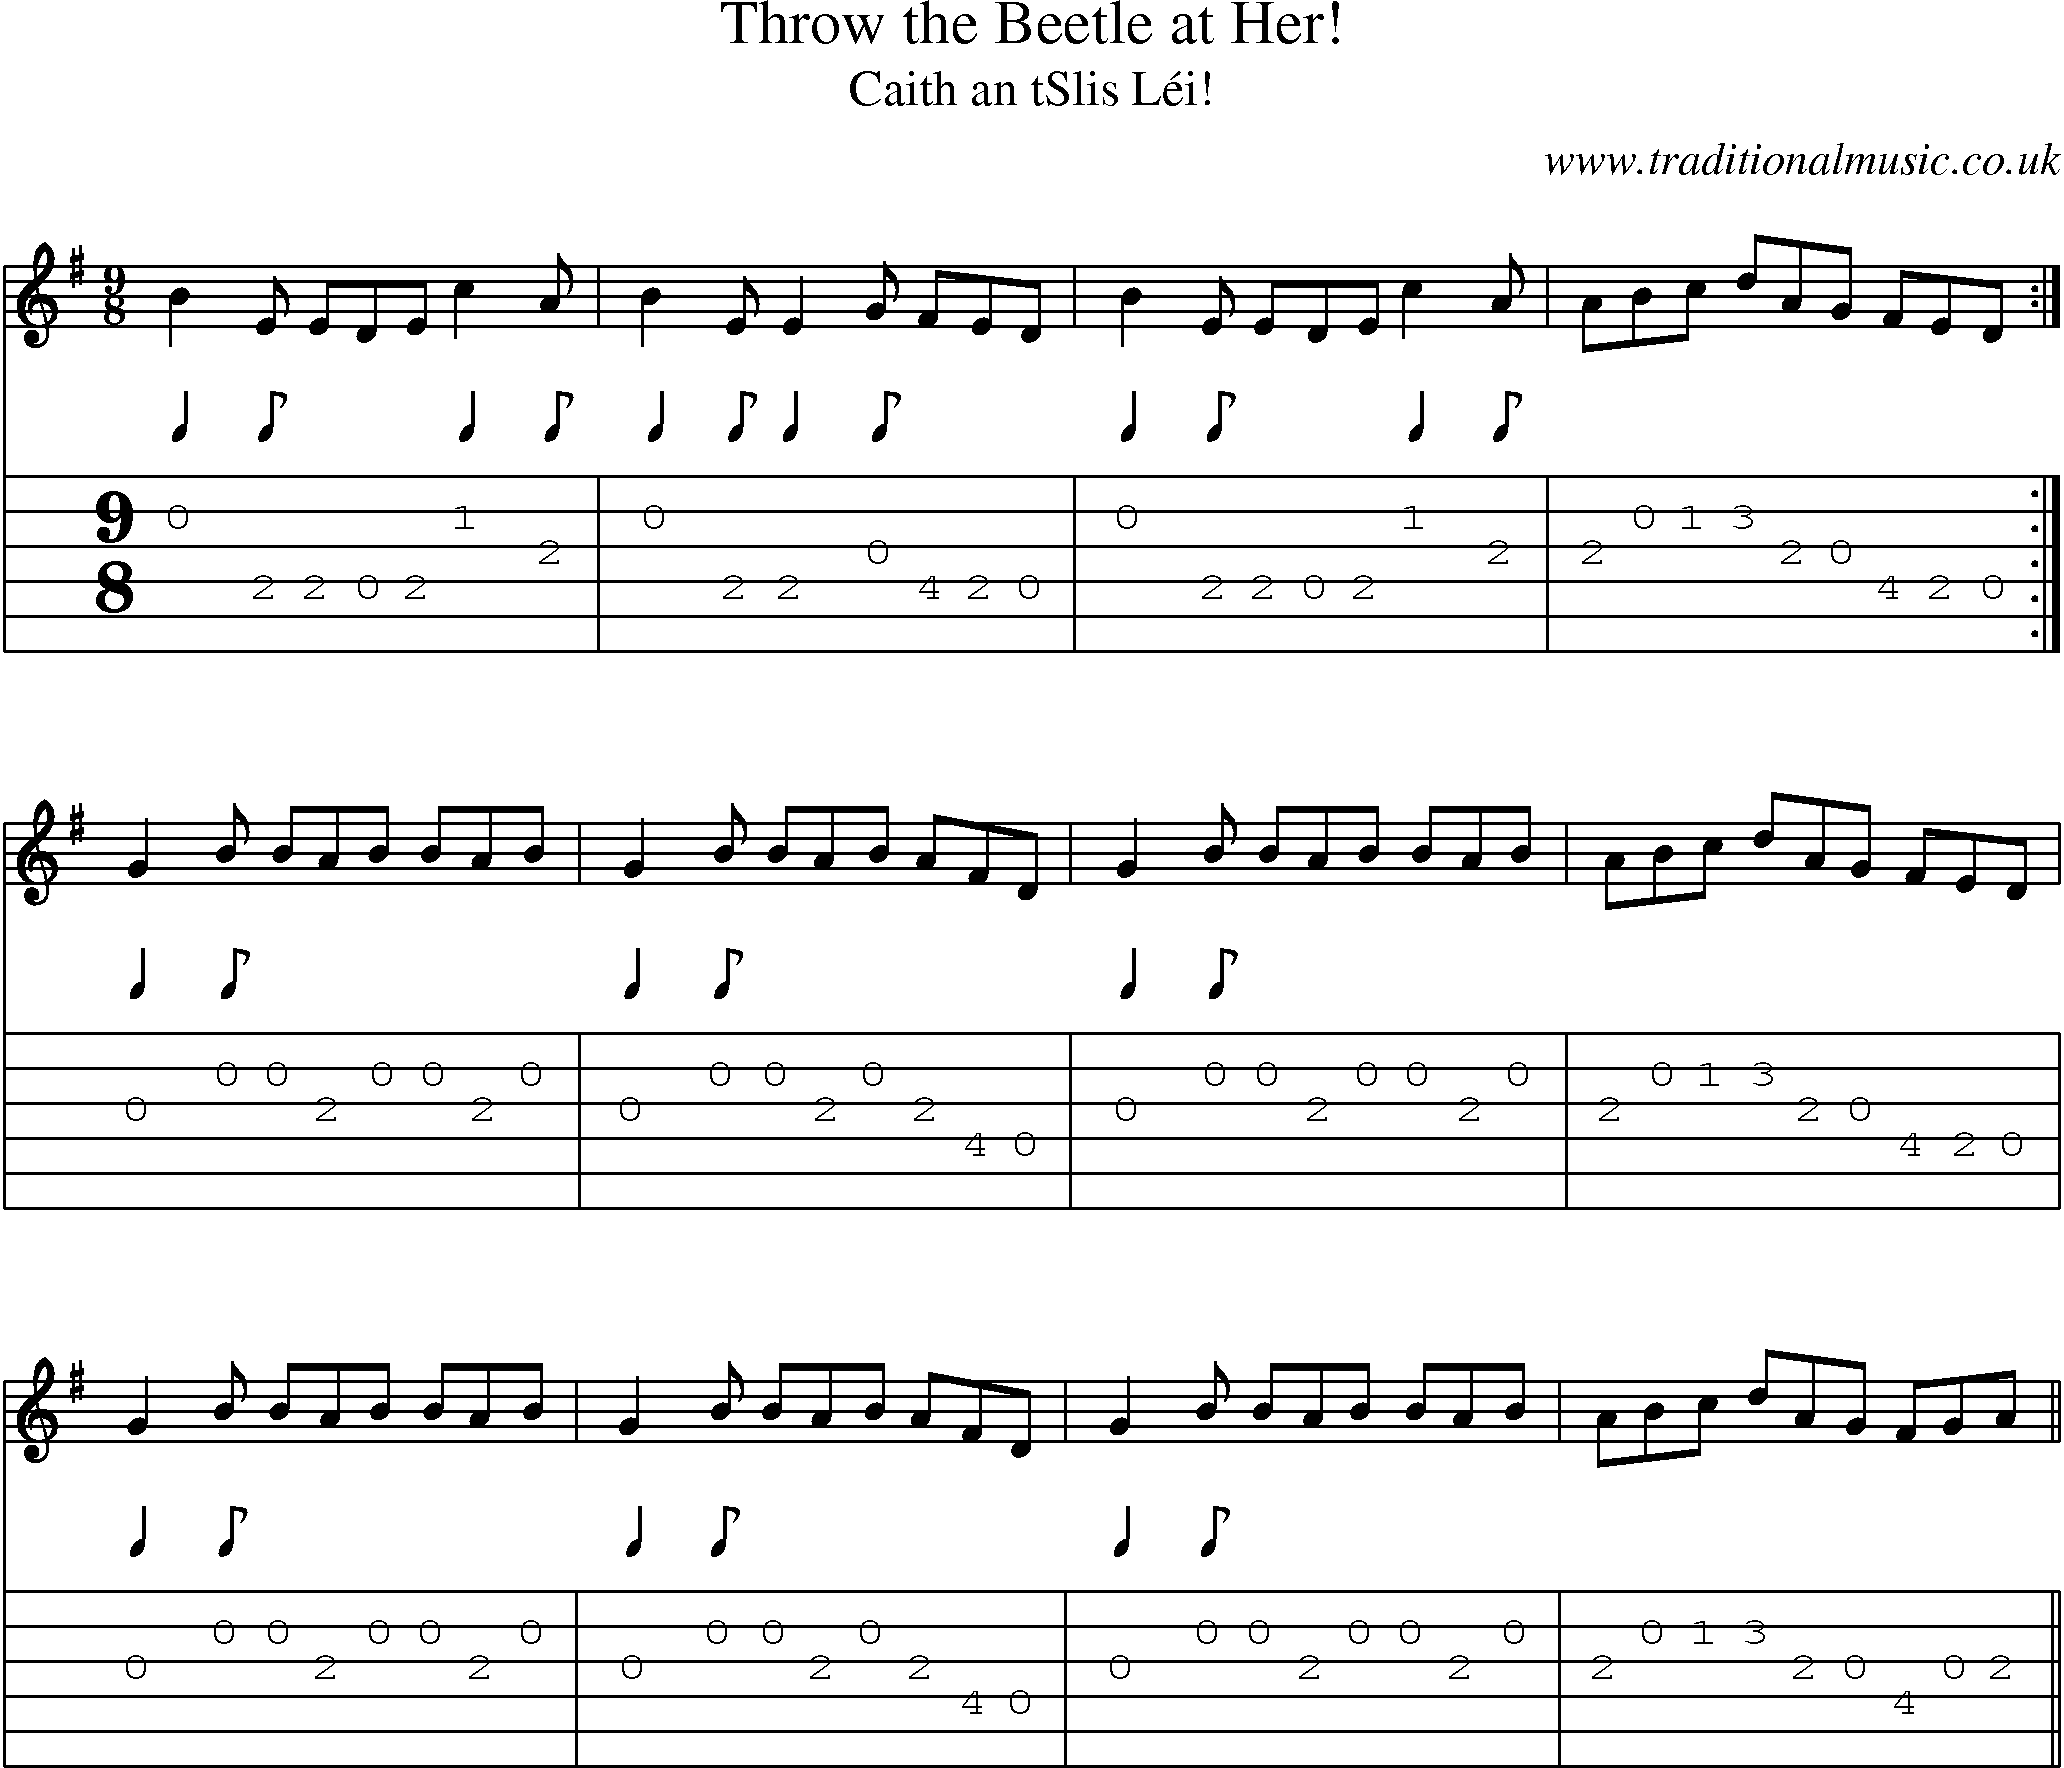 Music Score and Guitar Tabs for Throw Beetle At Her!